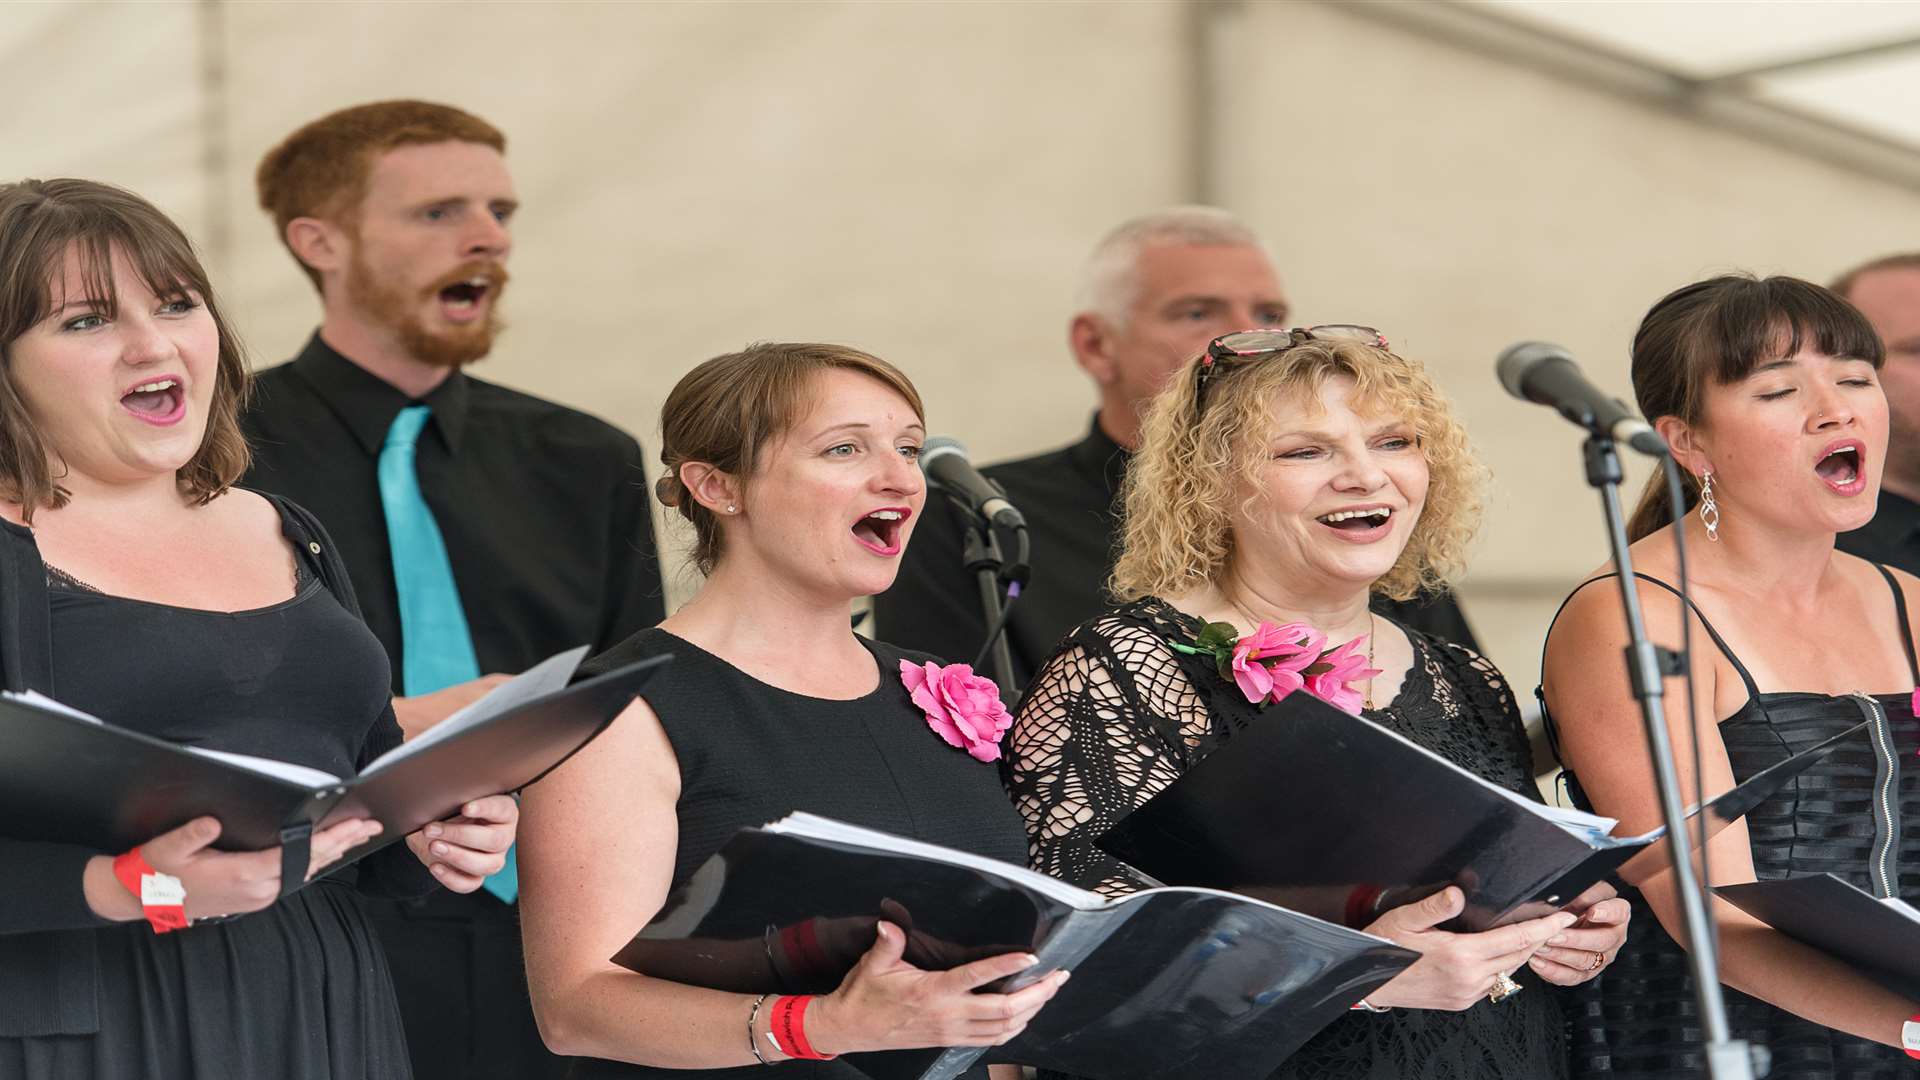 P&O Ferries workplace choir perform to the crowds Photo: Alan Langley